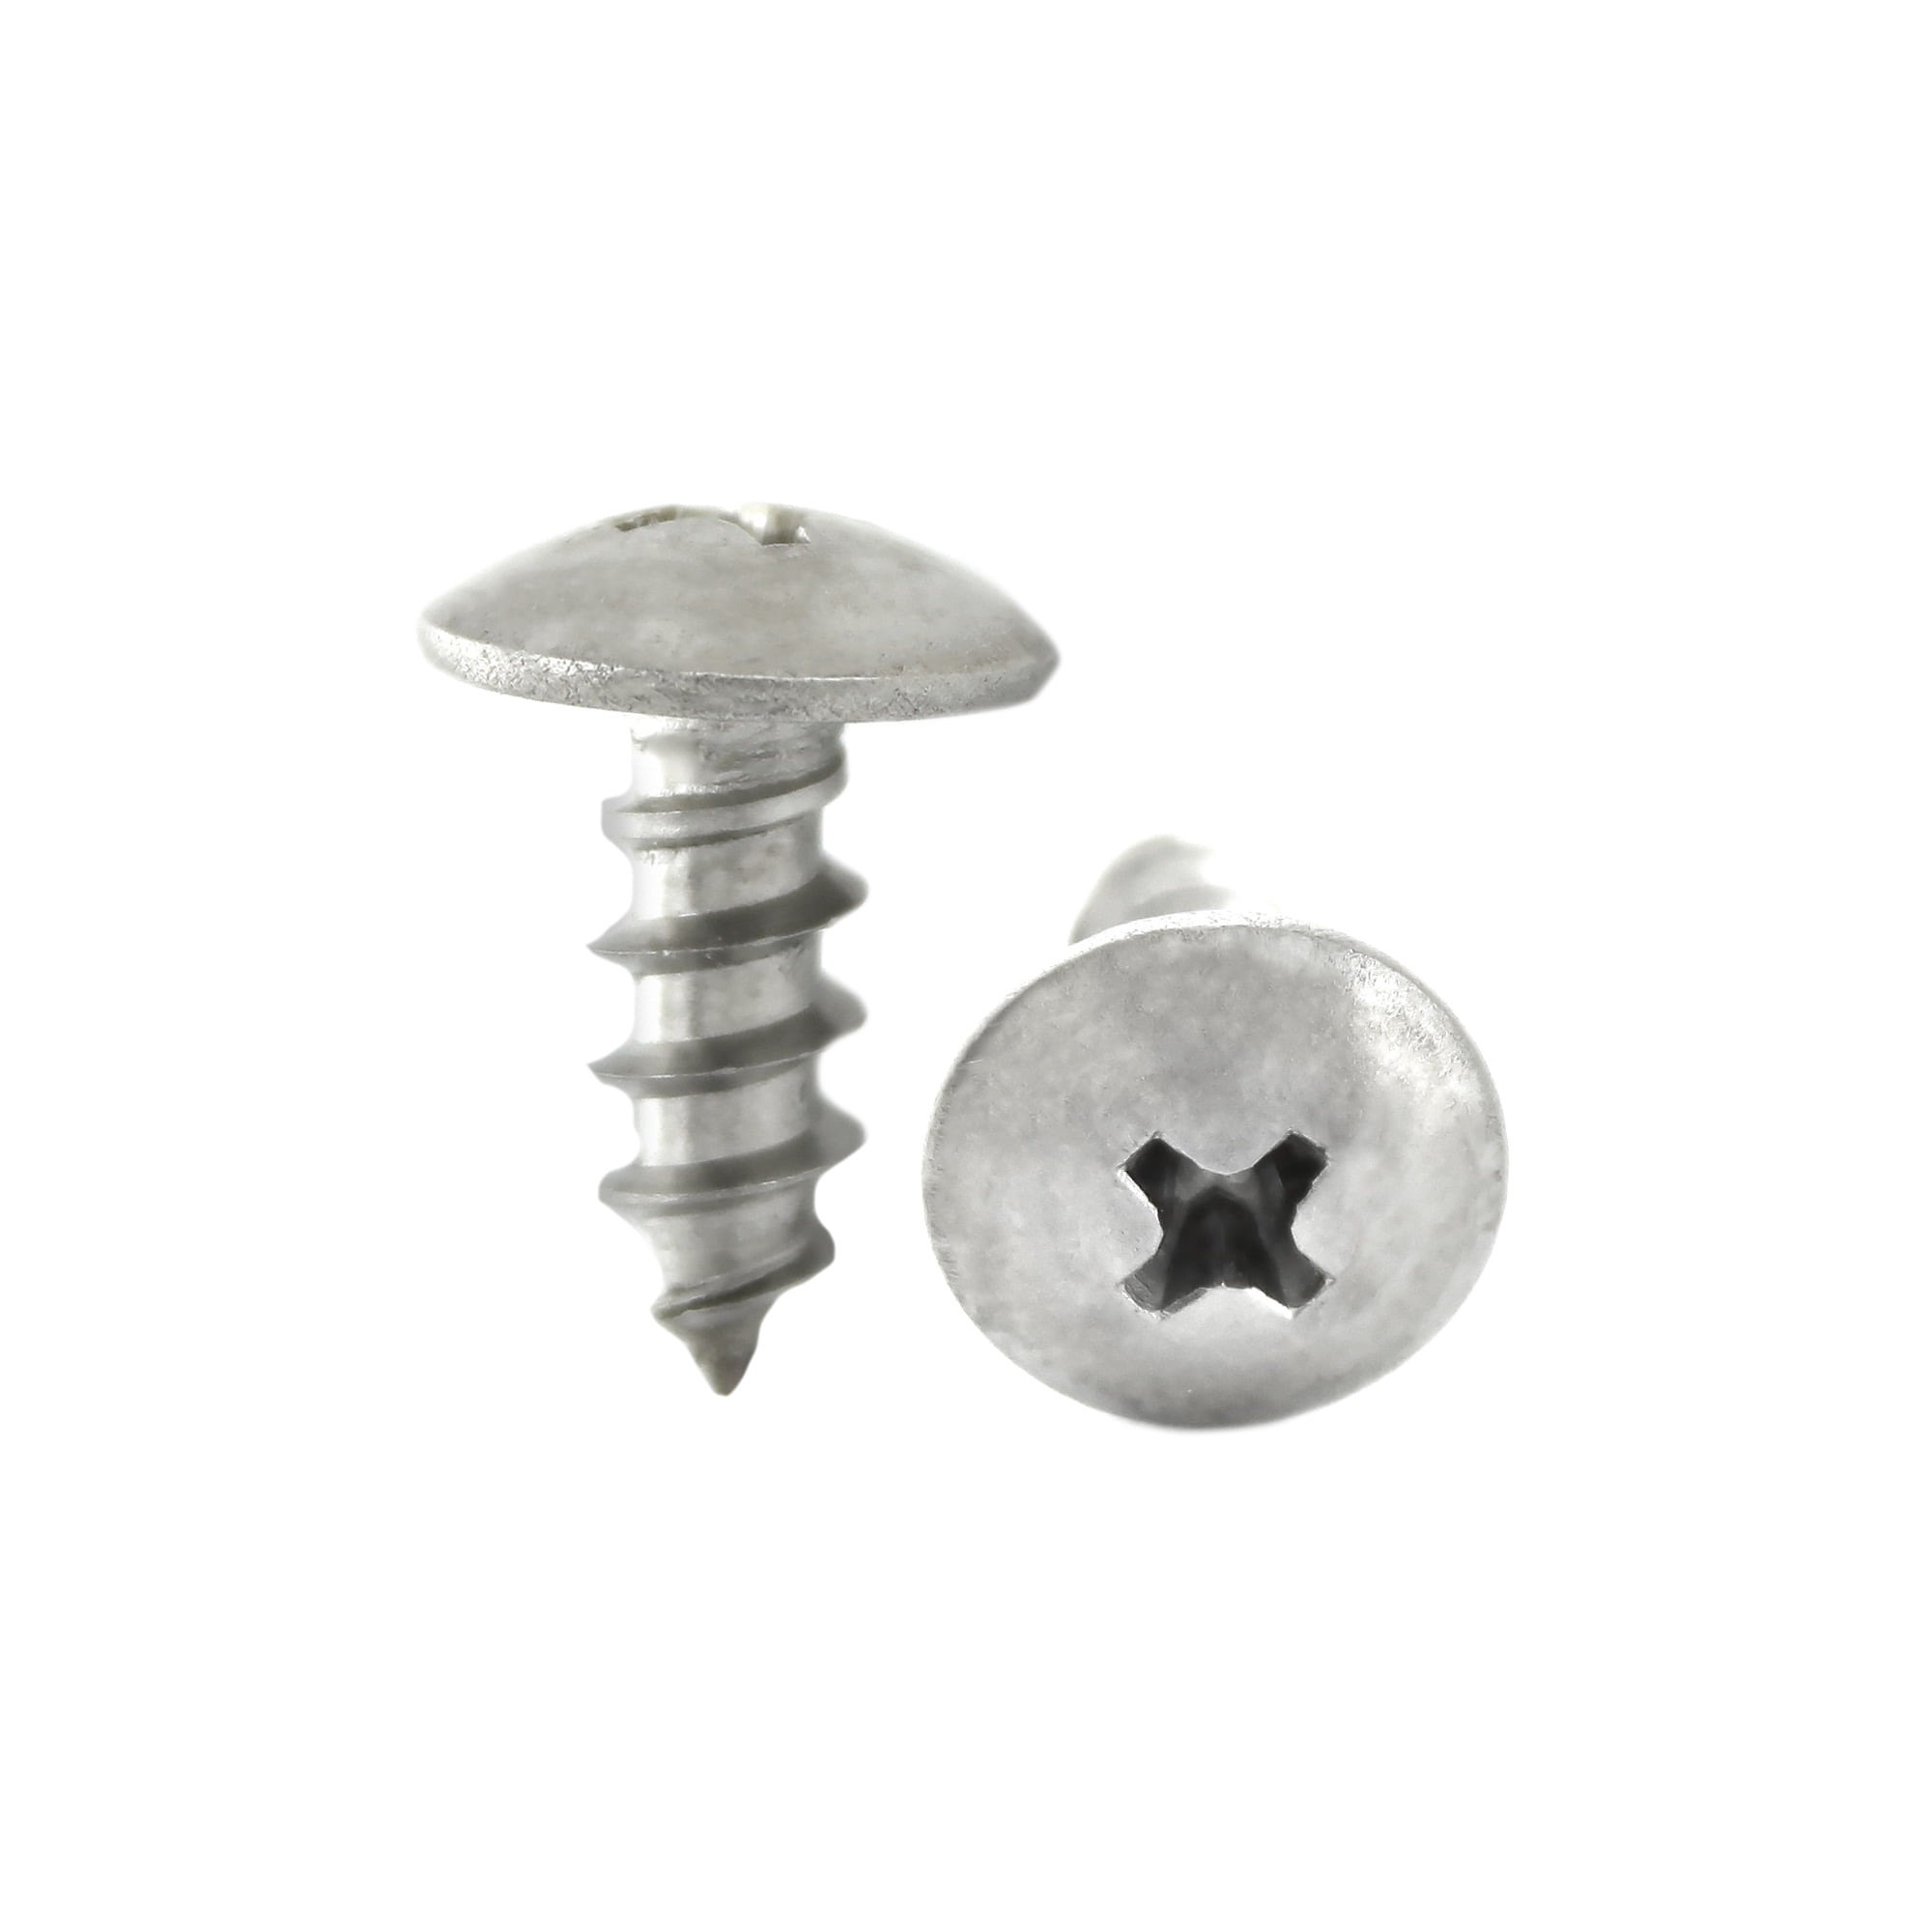 Stainless Steel Wood Screws #2 x 3/4 Brass Round Head Wood Screws Slotted Drive 500 Pcs Quality Metal Fast 